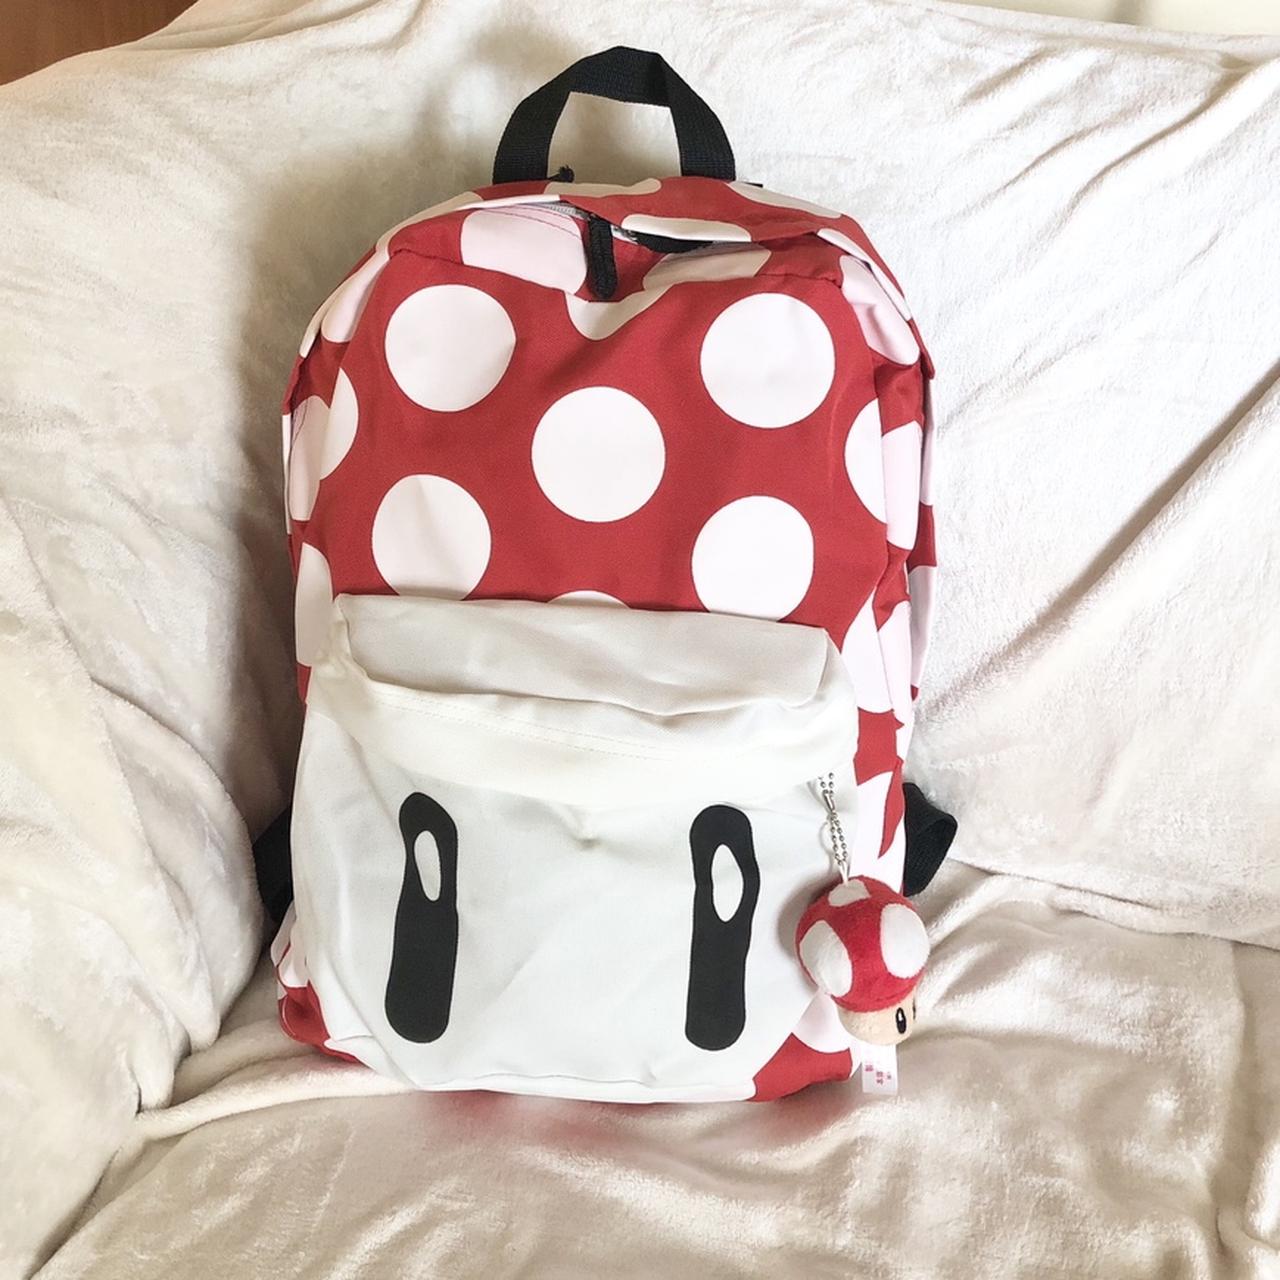 mario mushroom backpack 🍄 comes with matching... - Depop